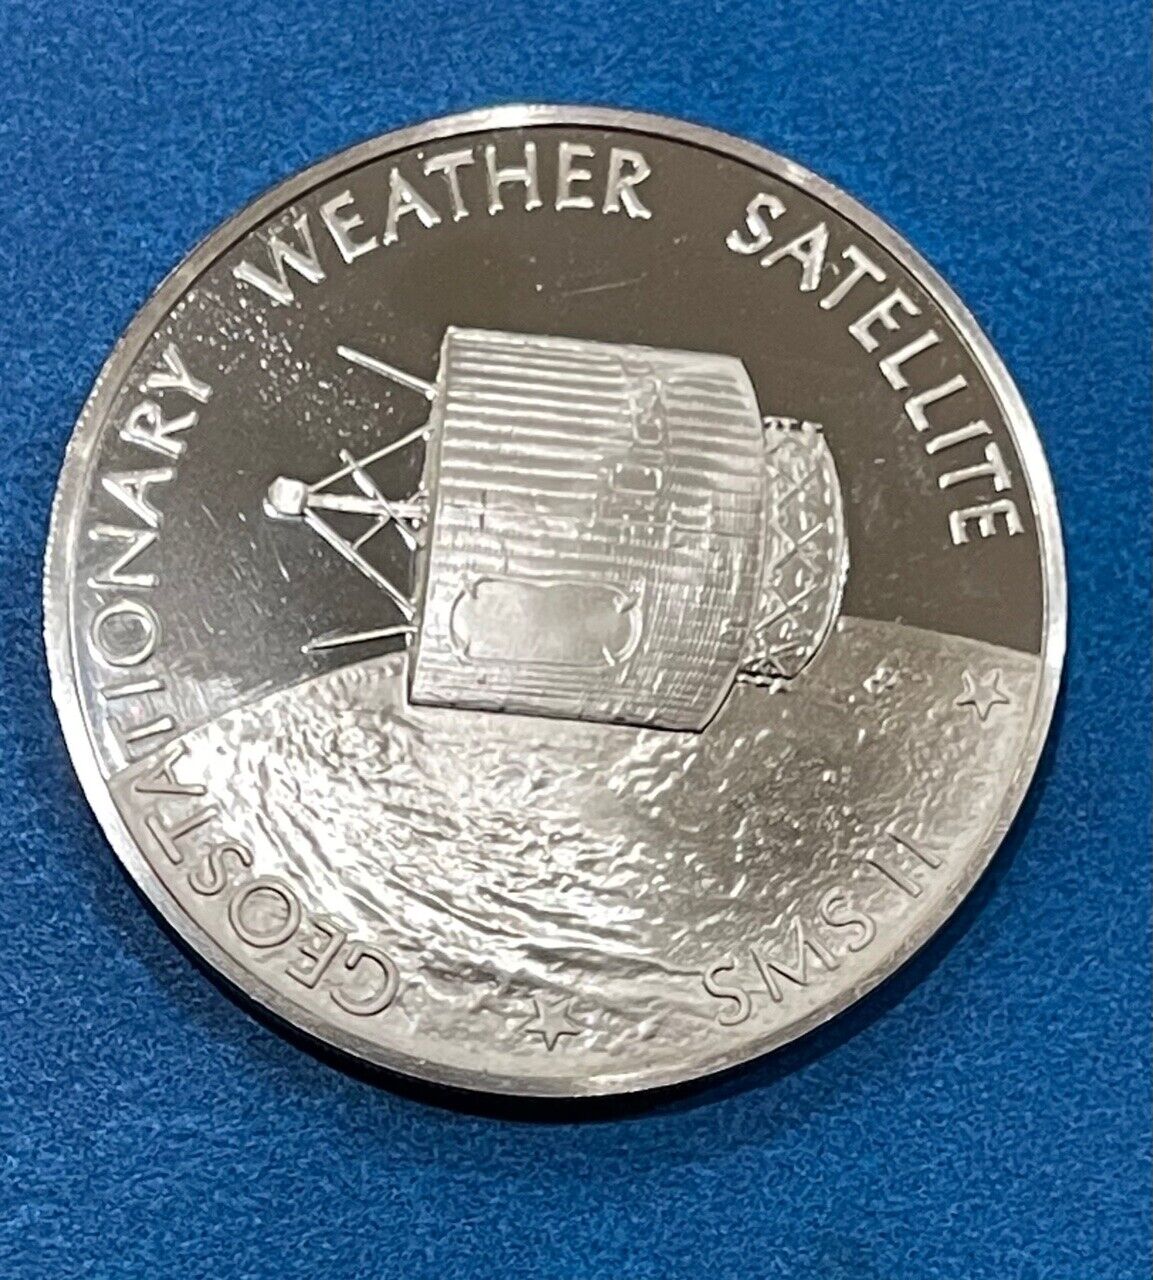 SMS II SATELLITE FLIGHTS SERIES PROOF AMERICA IN SPACE STERLING SILVER COIN